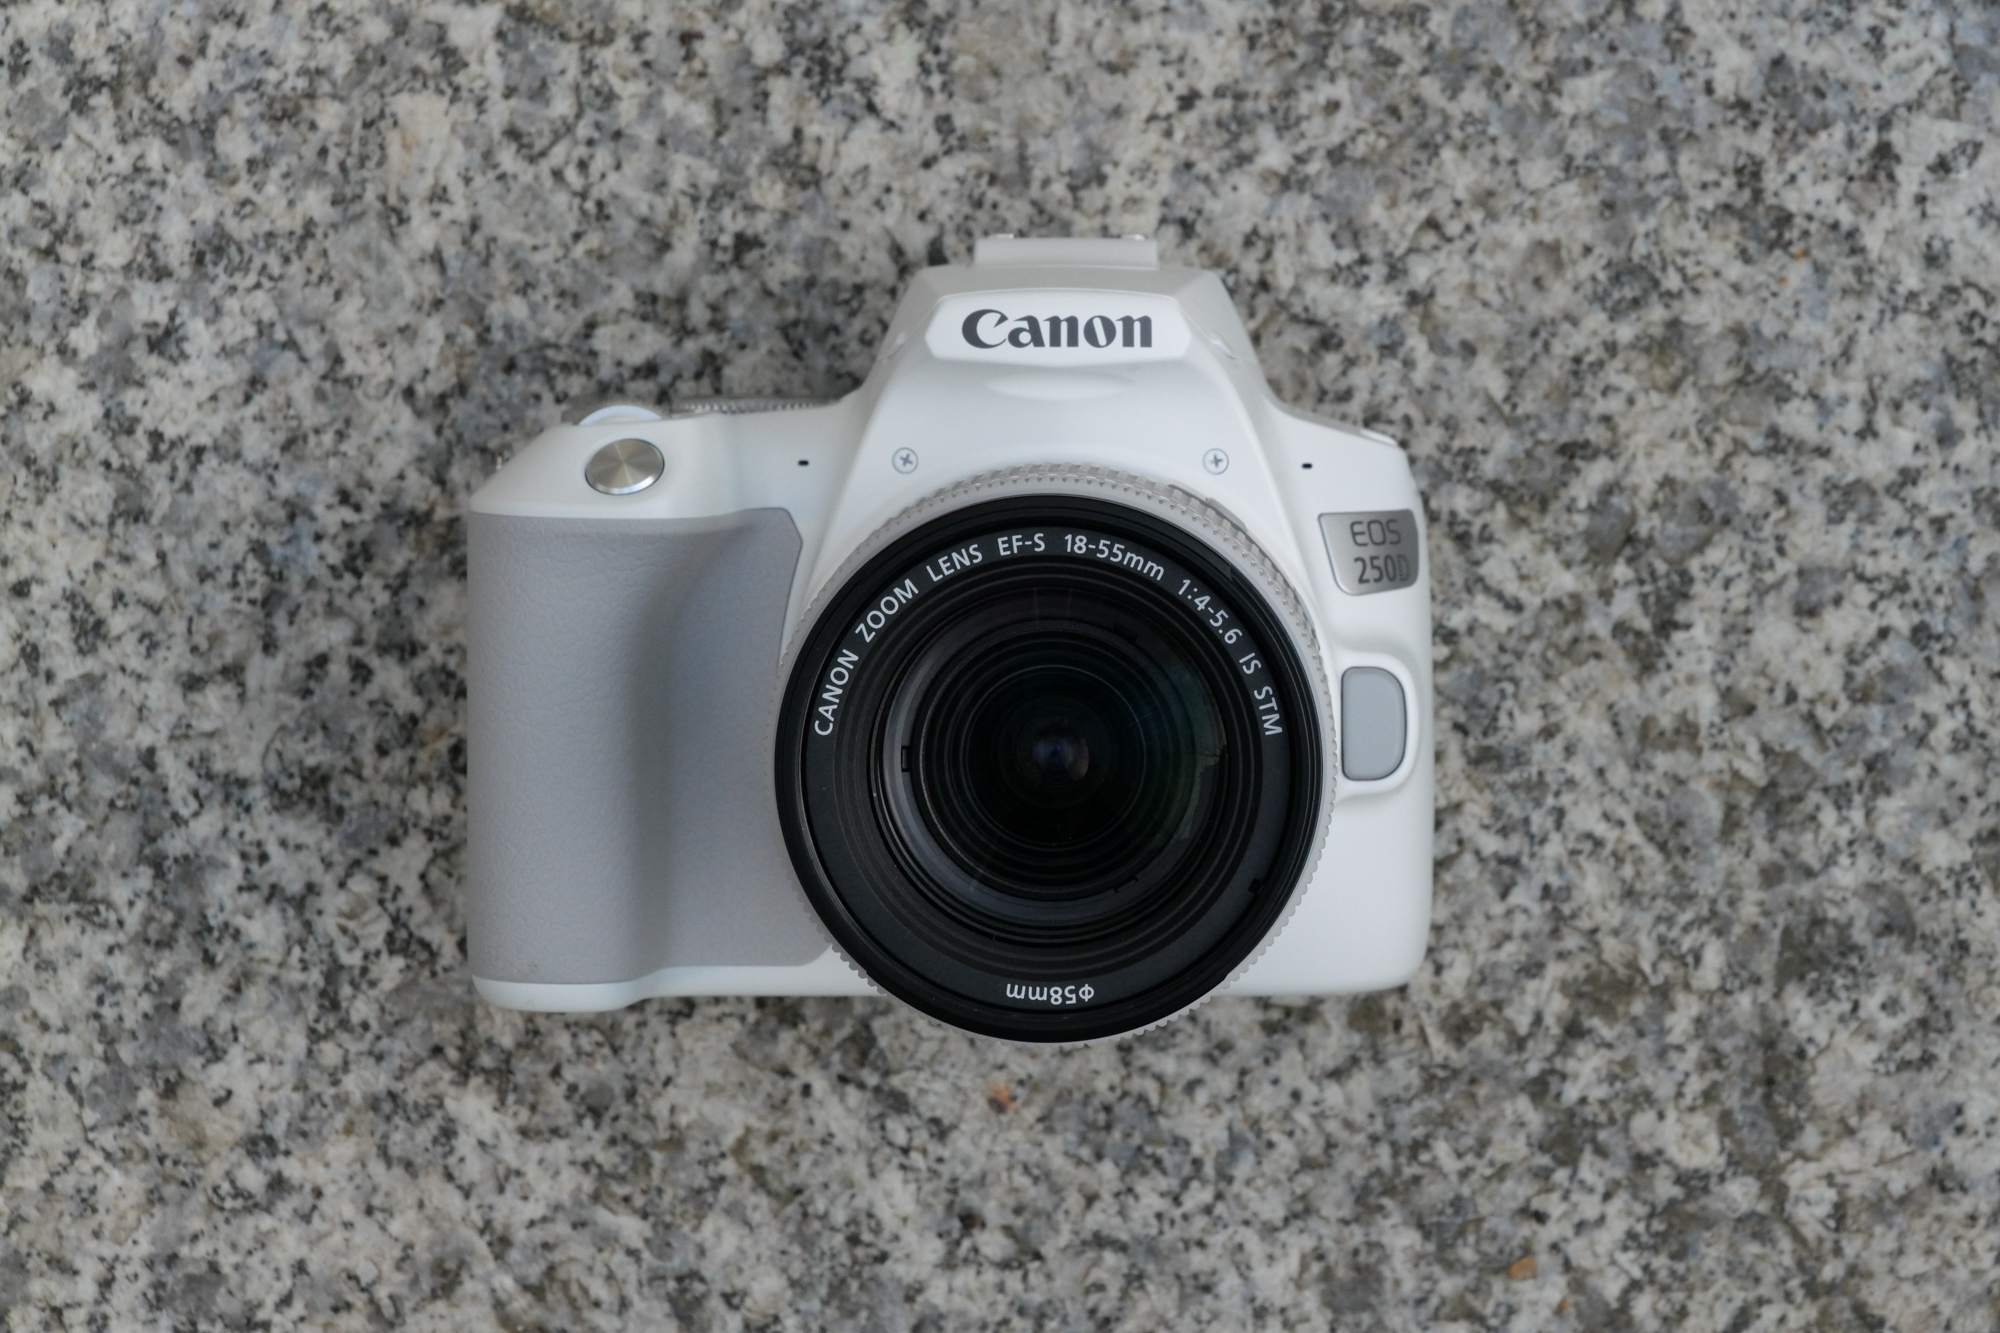 The Canon Rebel SL3 / EOS 250D, one of the best Canon cameras, placed on a stone floor